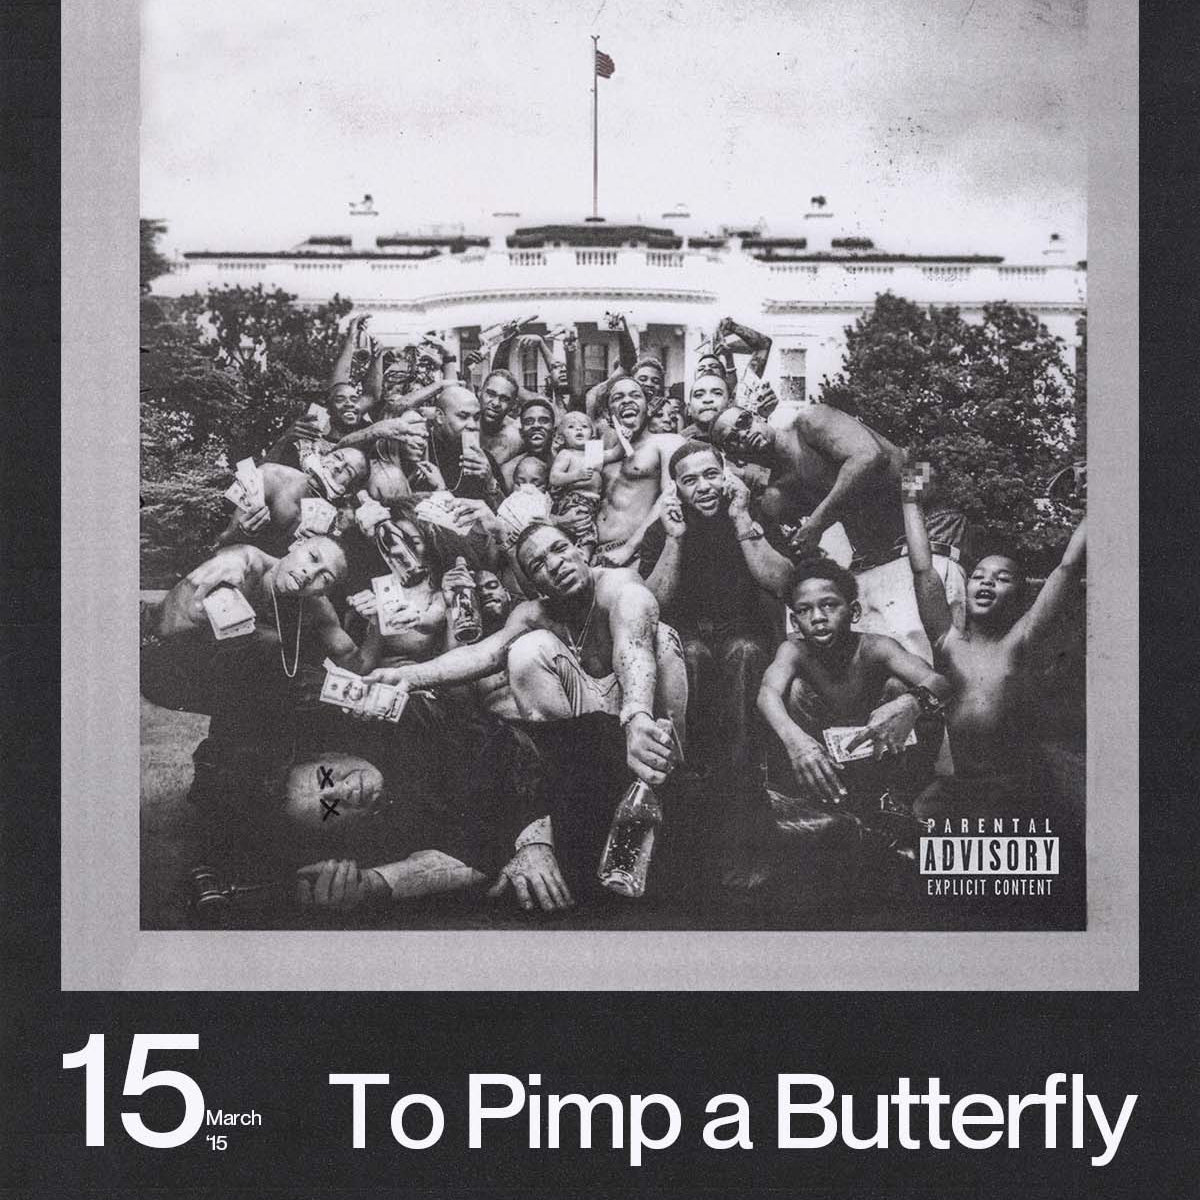 To Pimp A Butterfly (TPAB) - Kendrick Lamar Poster